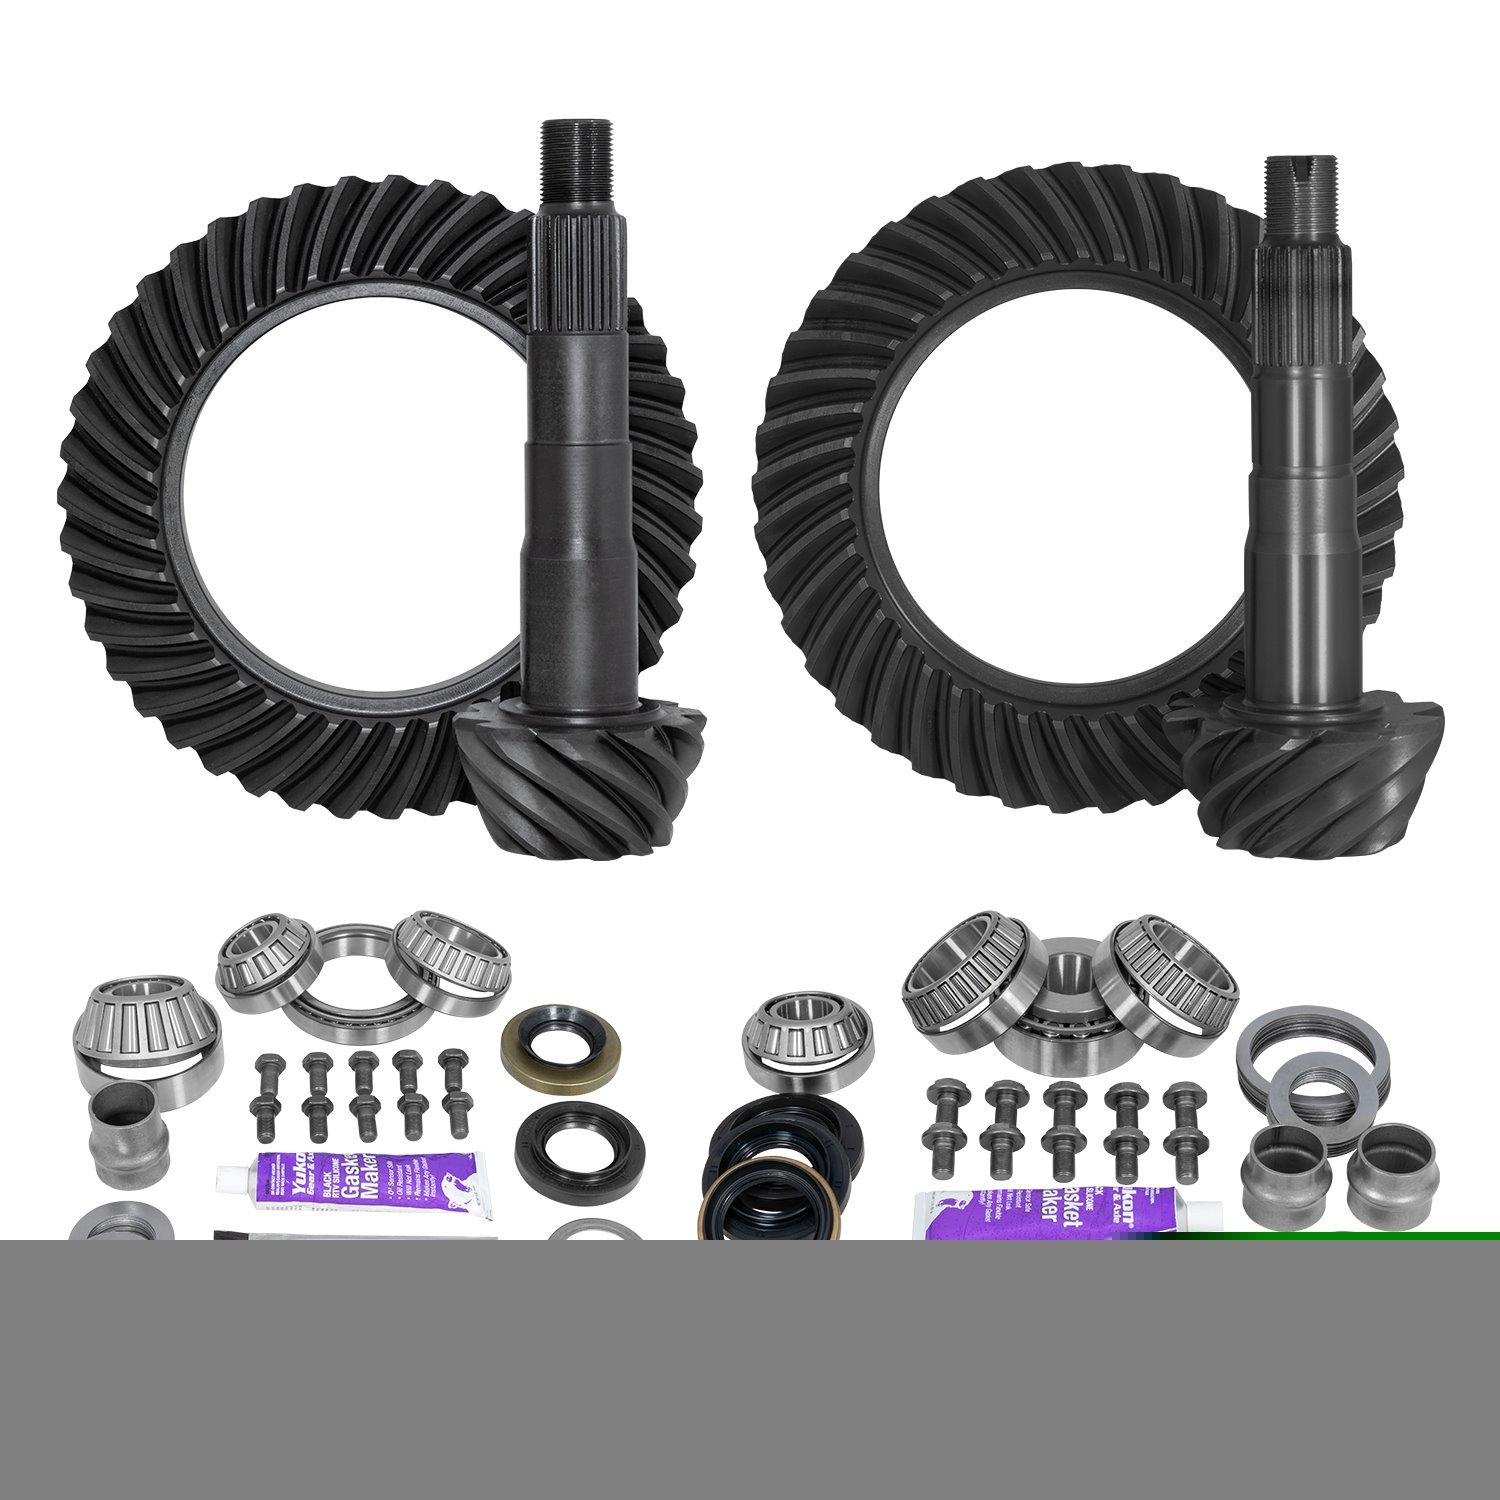 Ring & Pinion Gear Kit Package Front & Rear With Install Kits - Toyota 8 in./8 in.Ifs